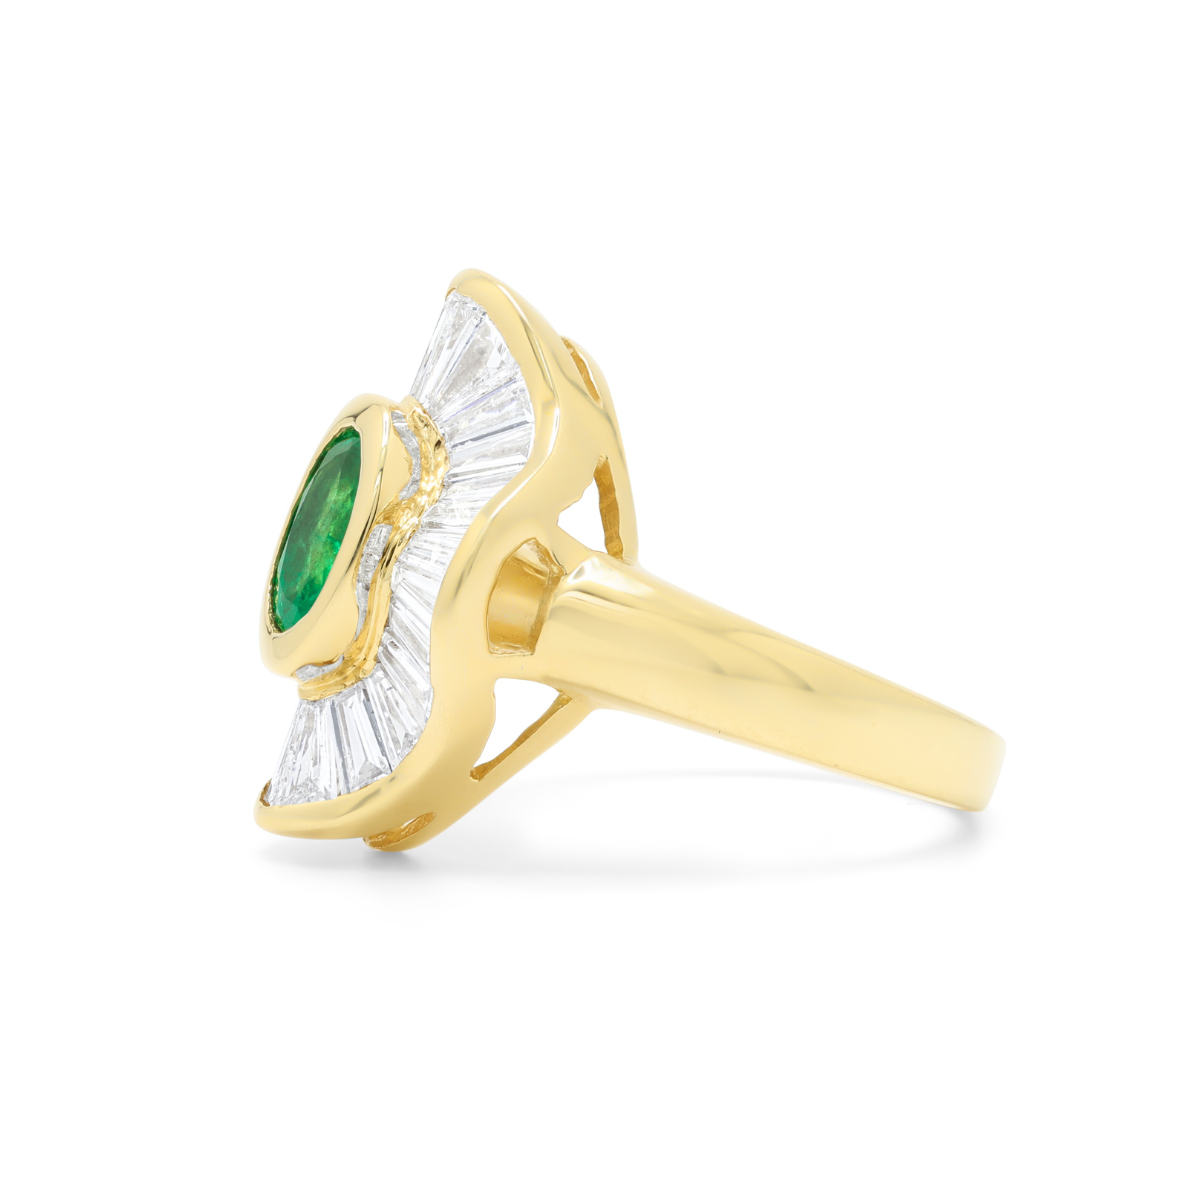 Oval Emerald Antique Ring